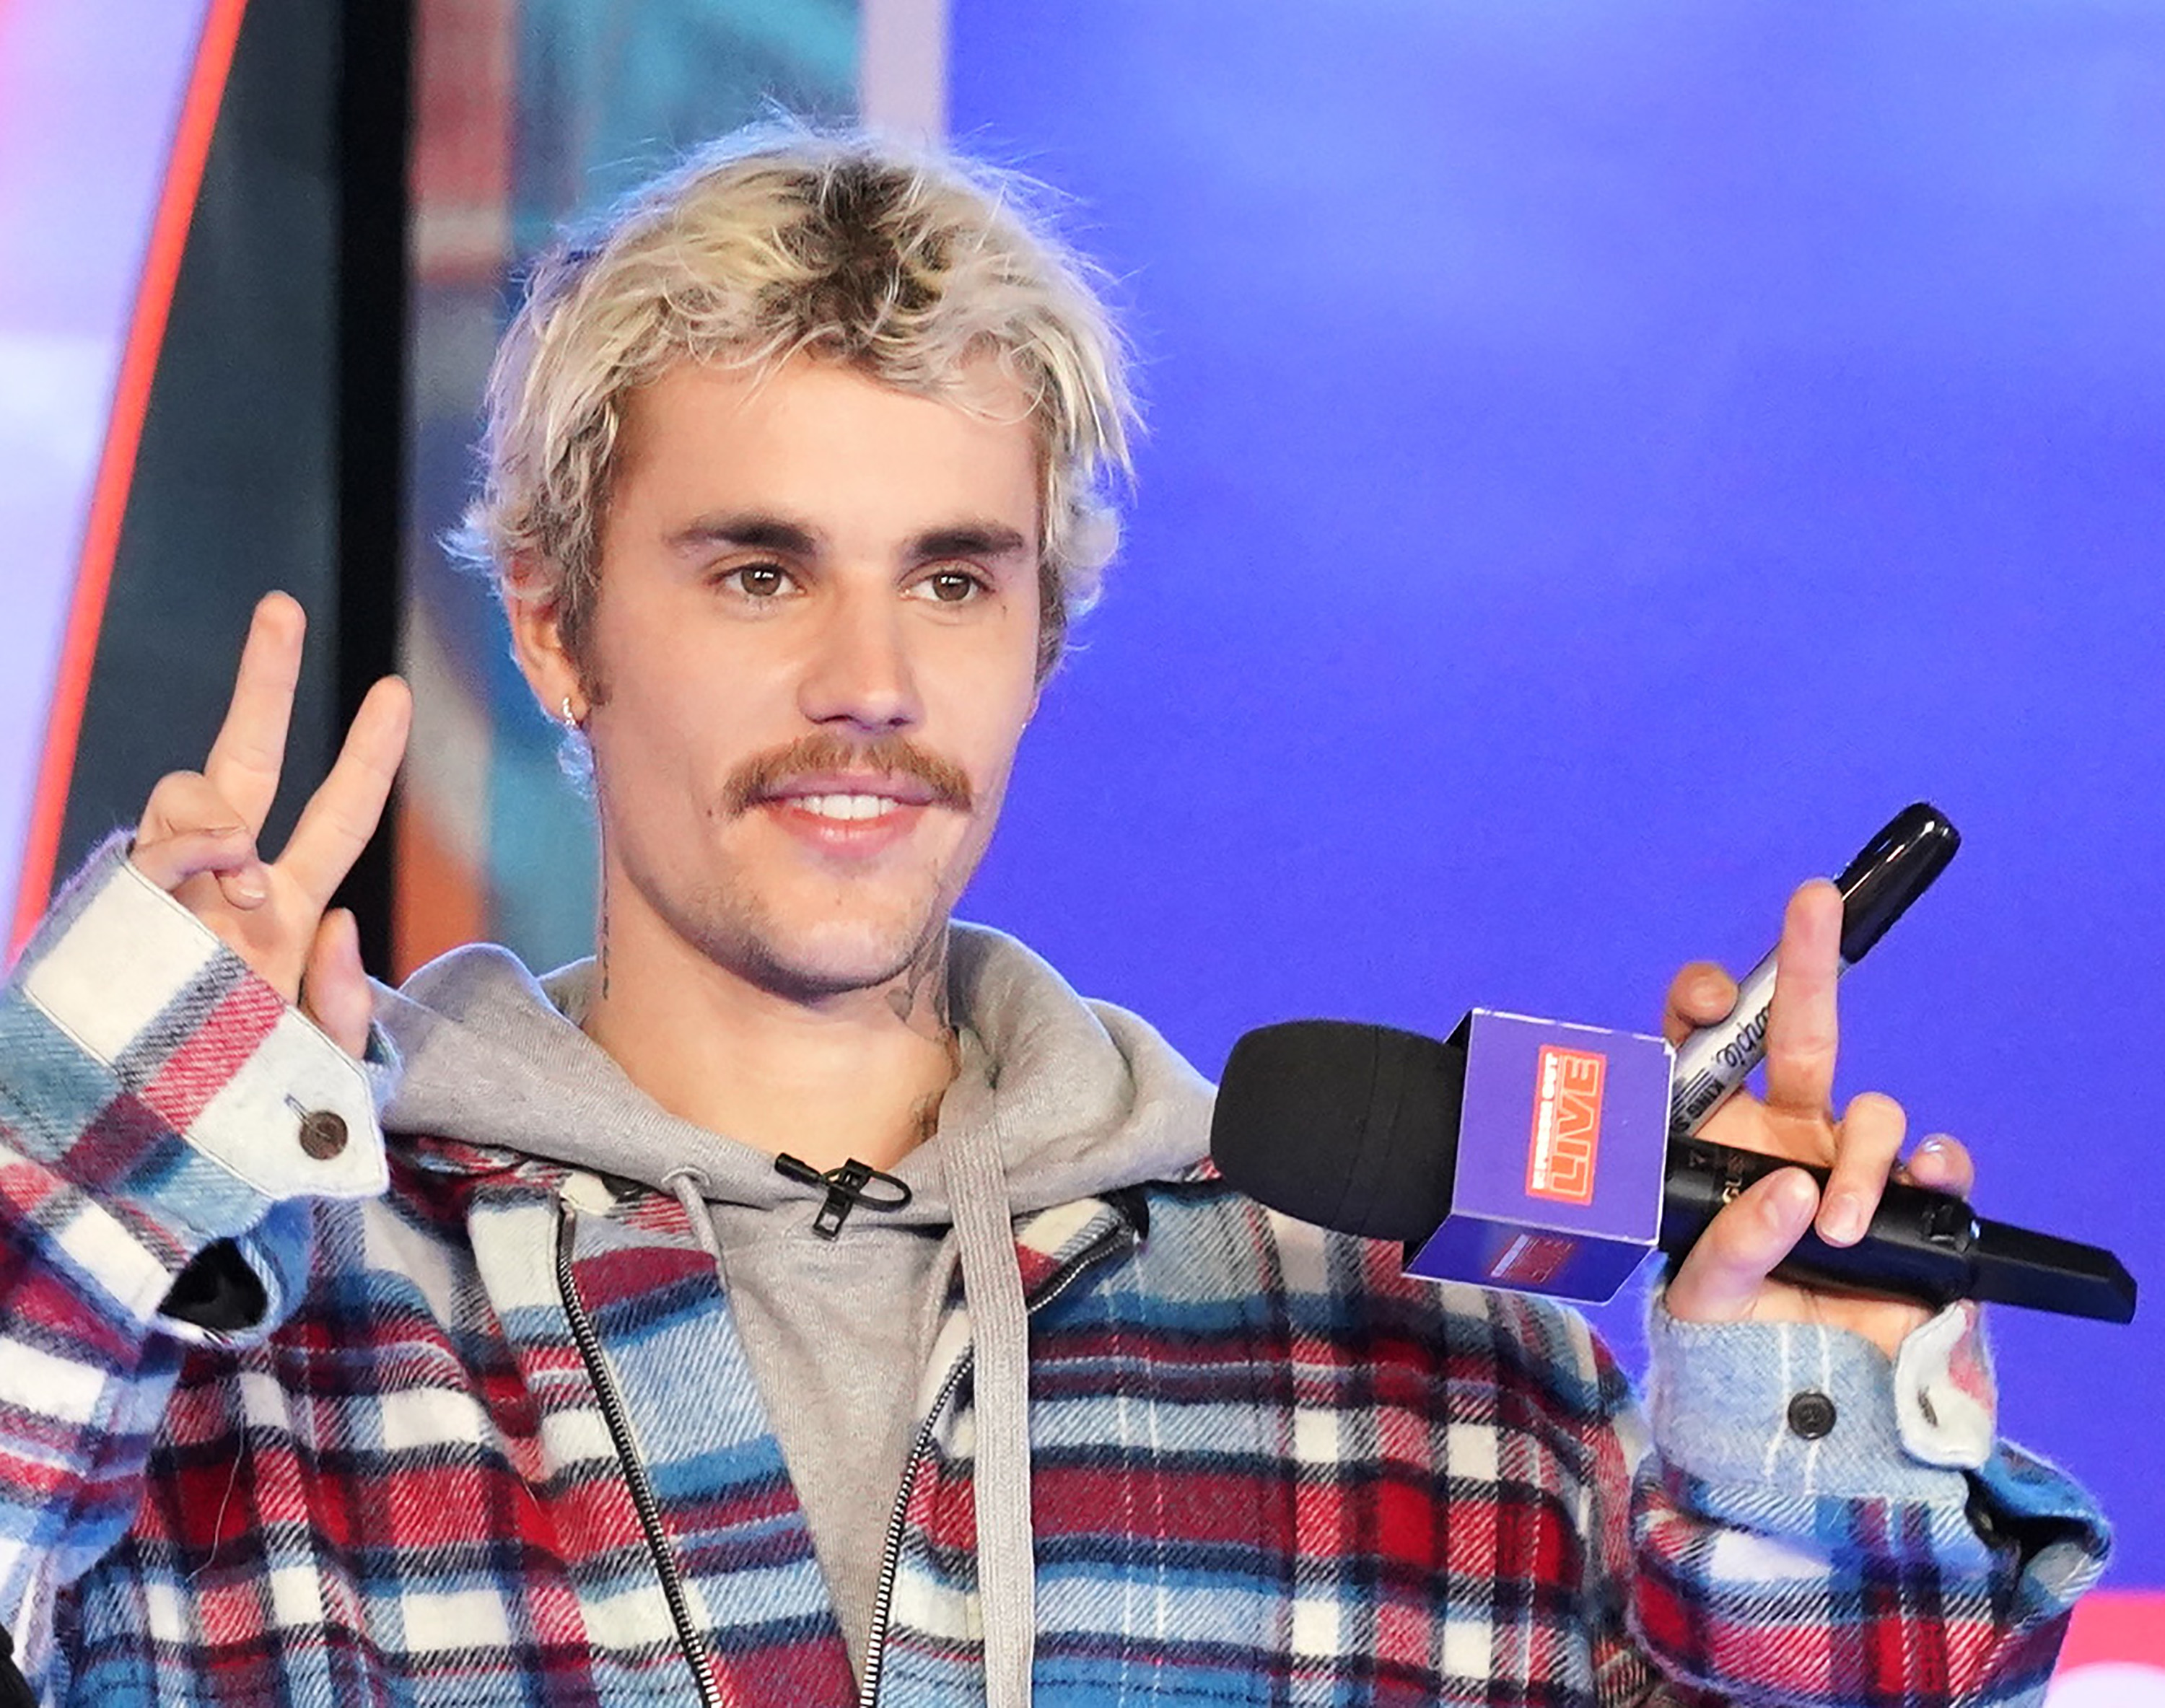 Vivendi Sales Gain as Justin Bieber Helps Offset Hit to Ad Unit Bloomberg